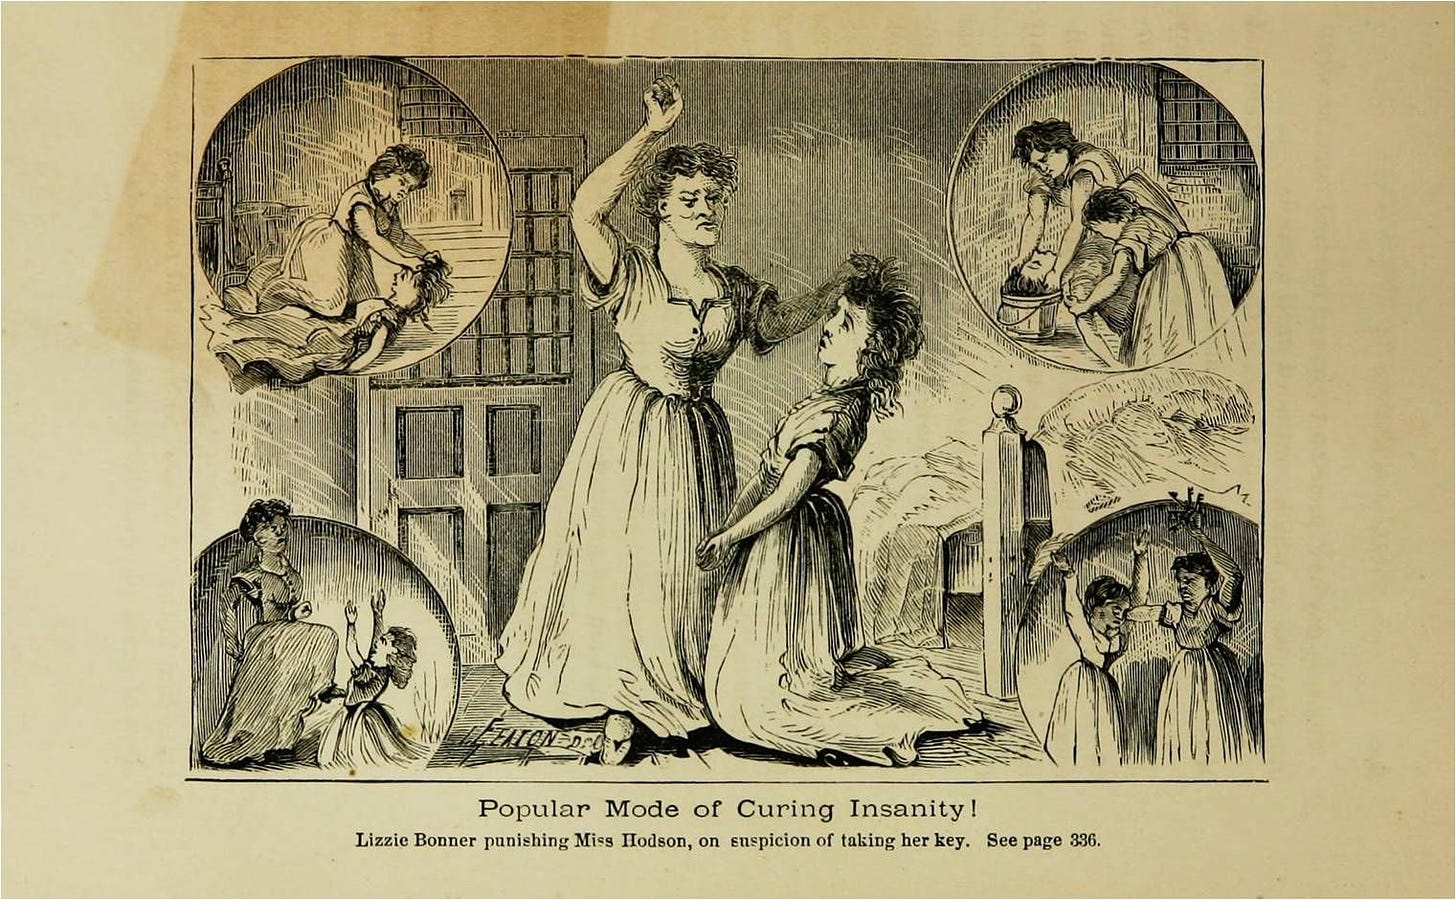 "popular mode of curing insanity!" illustration just shows a lady whacking a young woman on the head. 